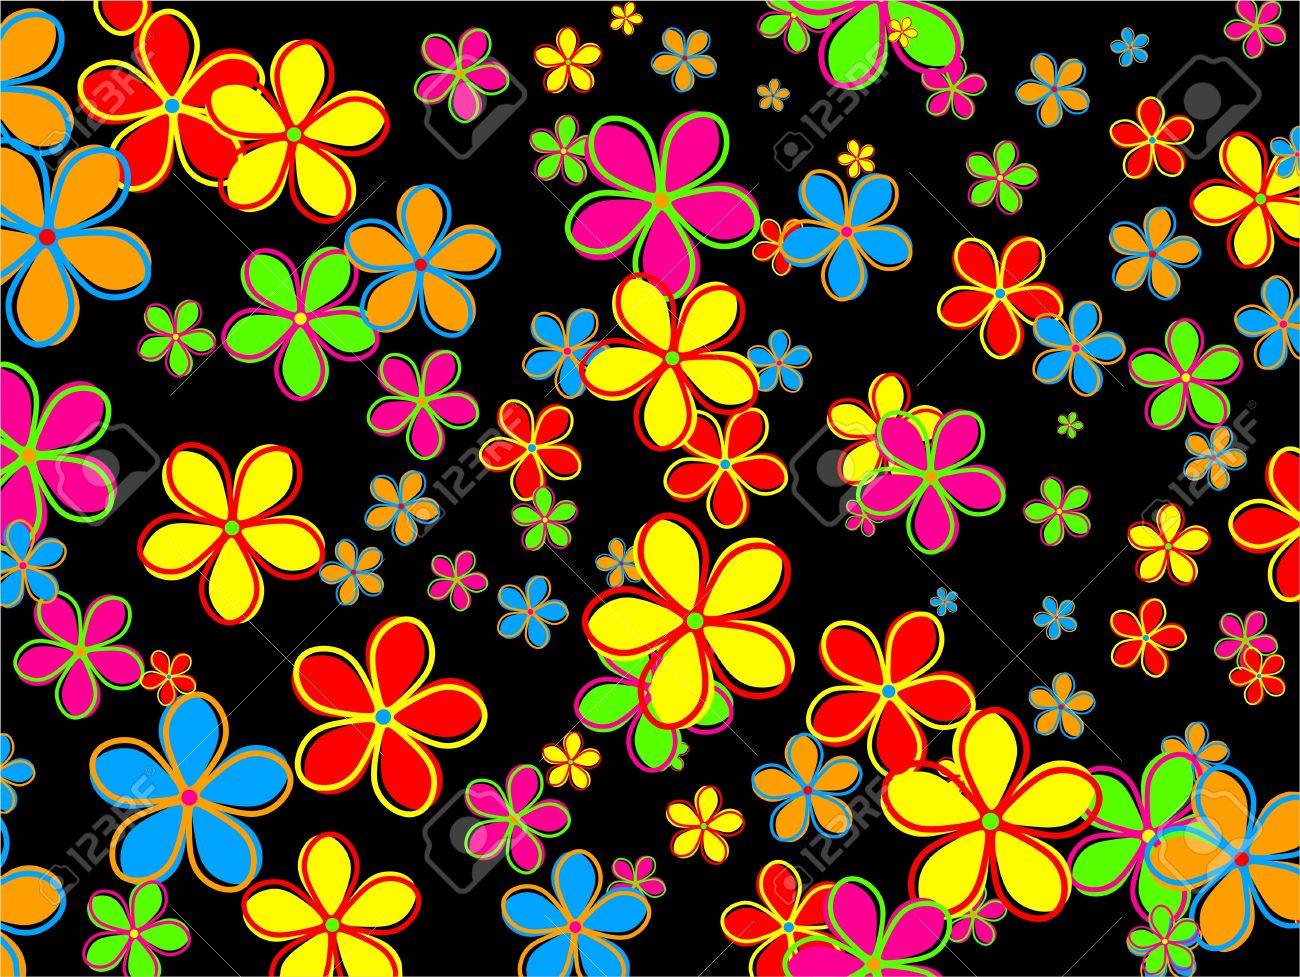 Funky Images, Beautiful Images, Images Of Funky, Beautiful - Retro Flower , HD Wallpaper & Backgrounds